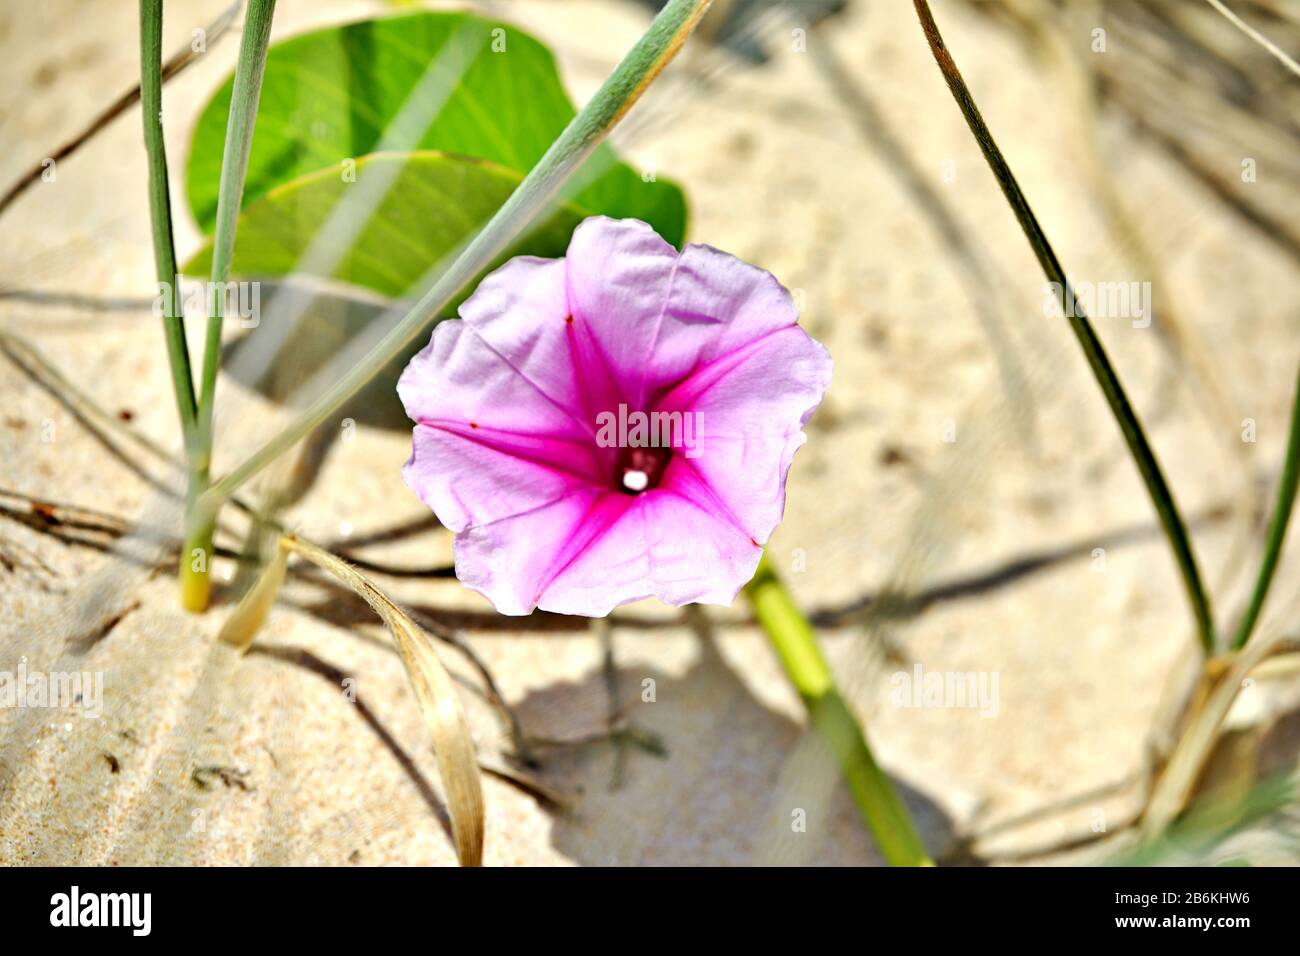 Beach flower in the sand Stock Photo